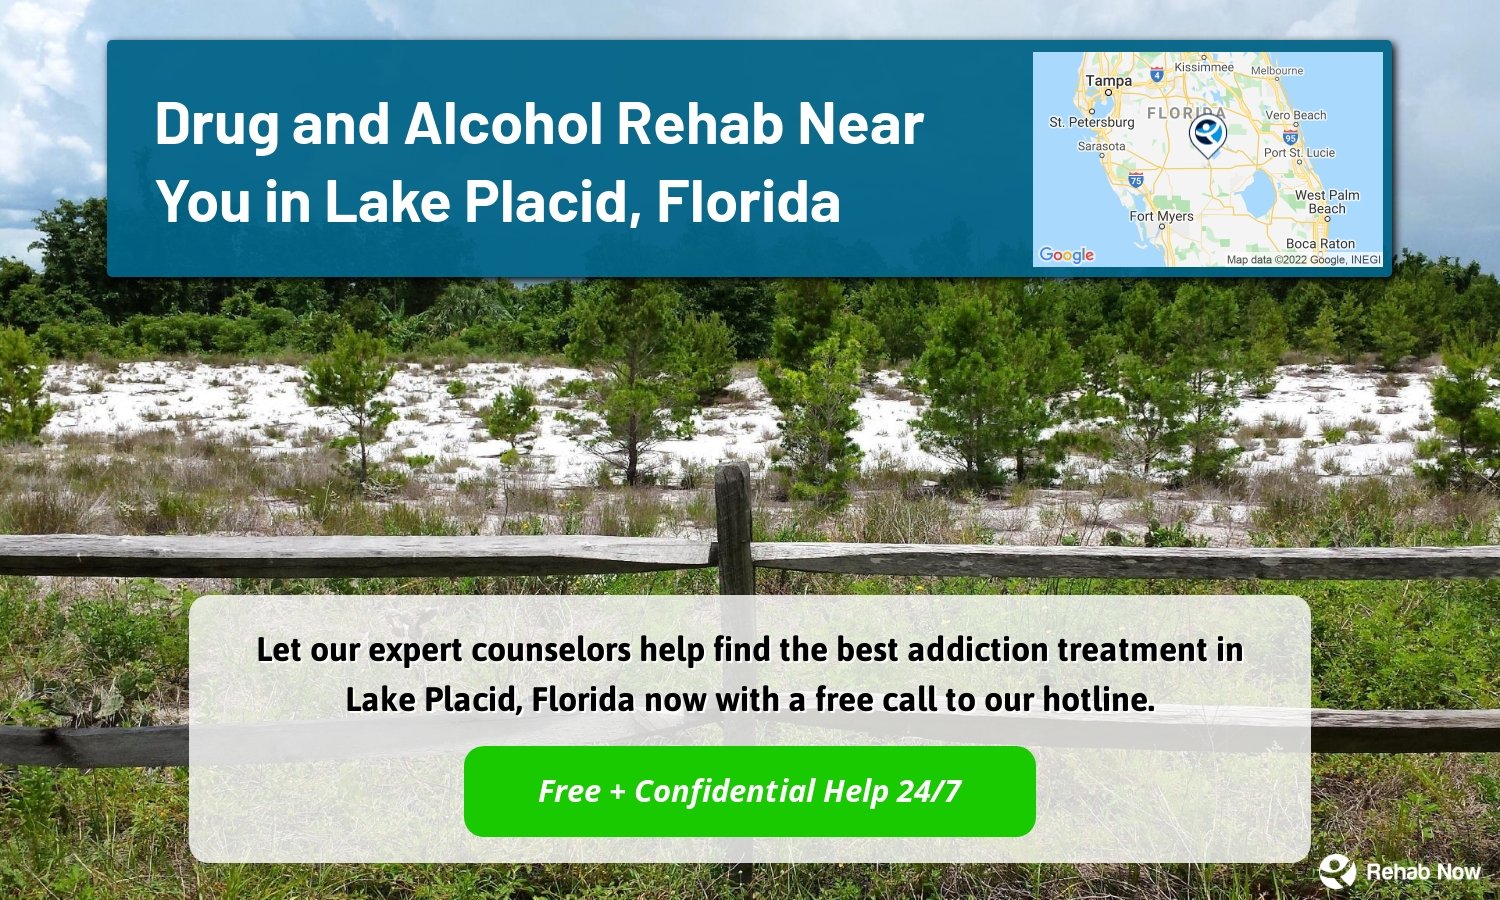 Let our expert counselors help find the best addiction treatment in Lake Placid, Florida now with a free call to our hotline.